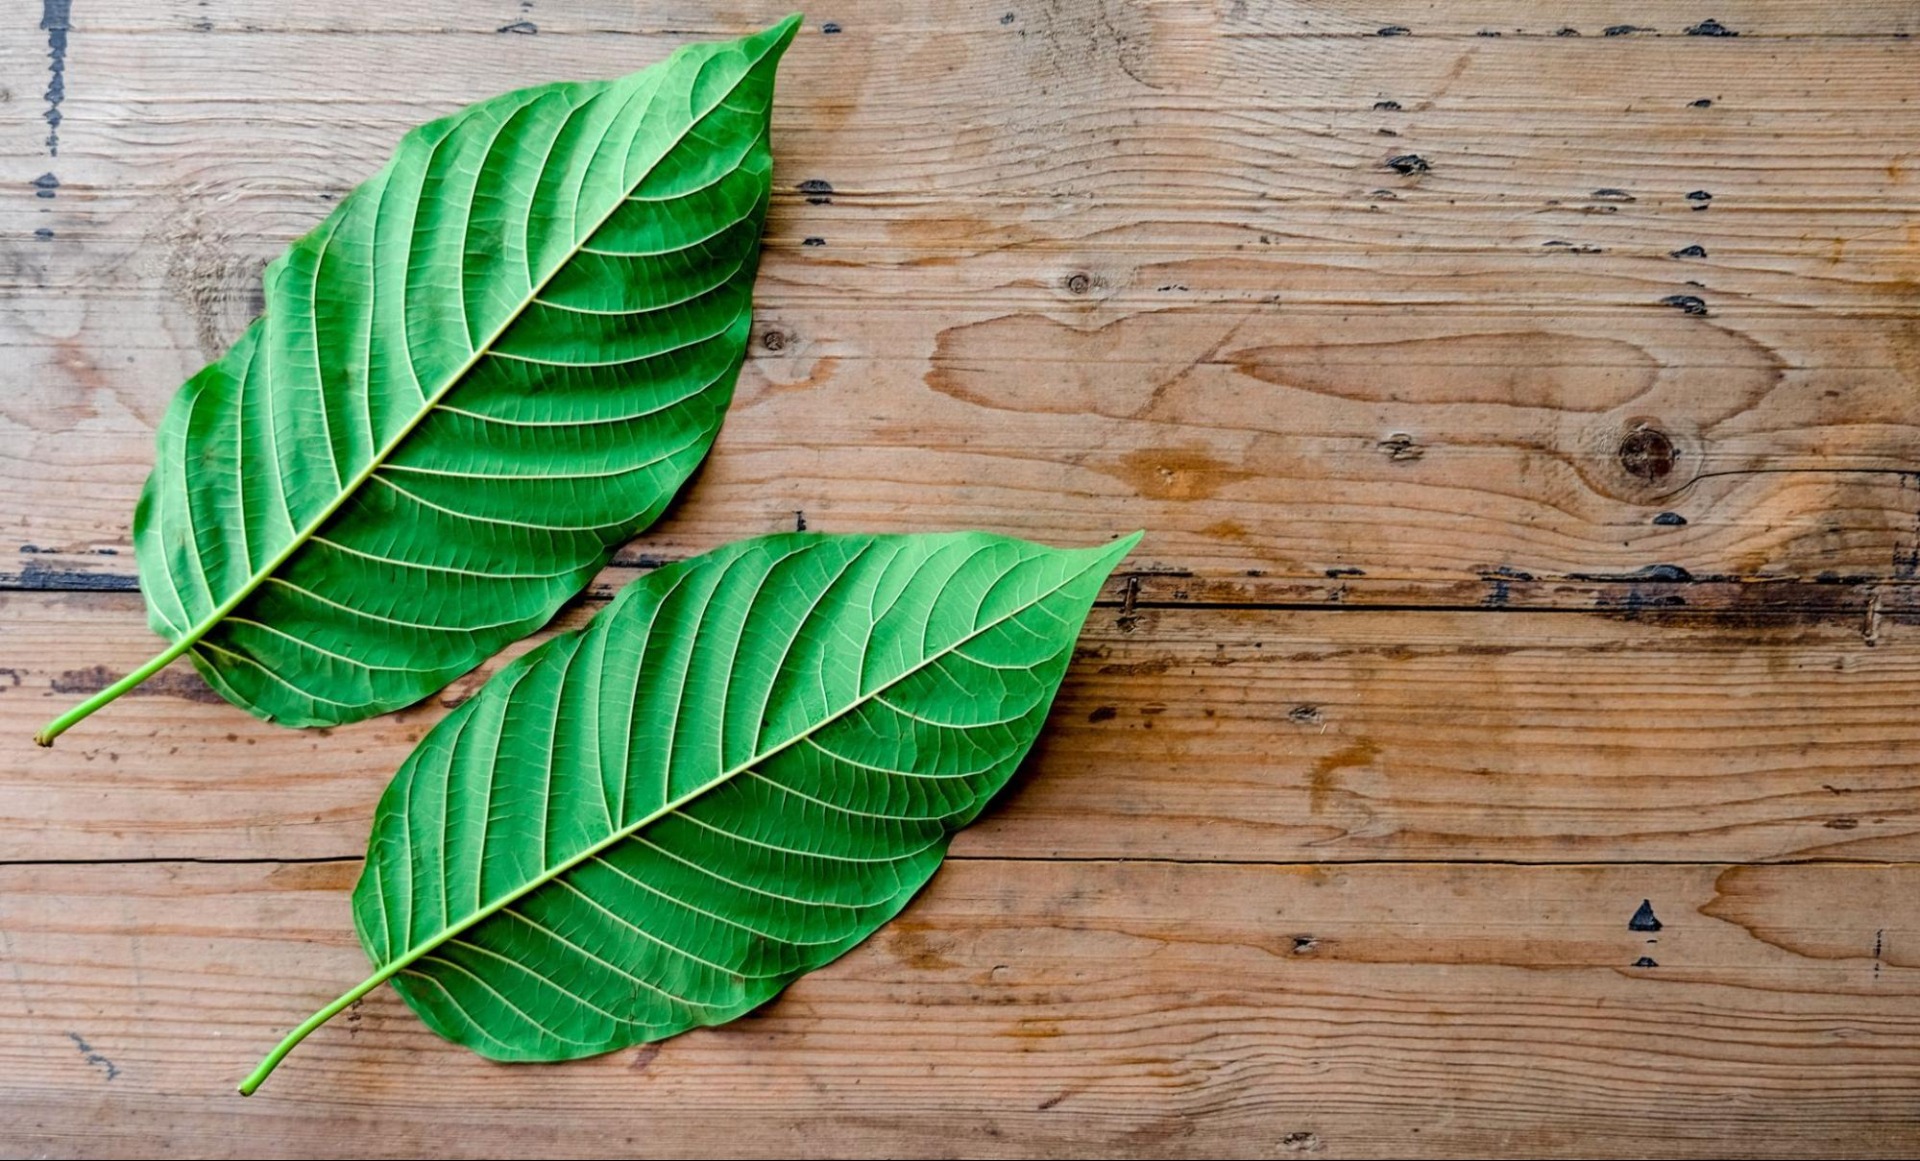 What are the nutritional benefits of kratom